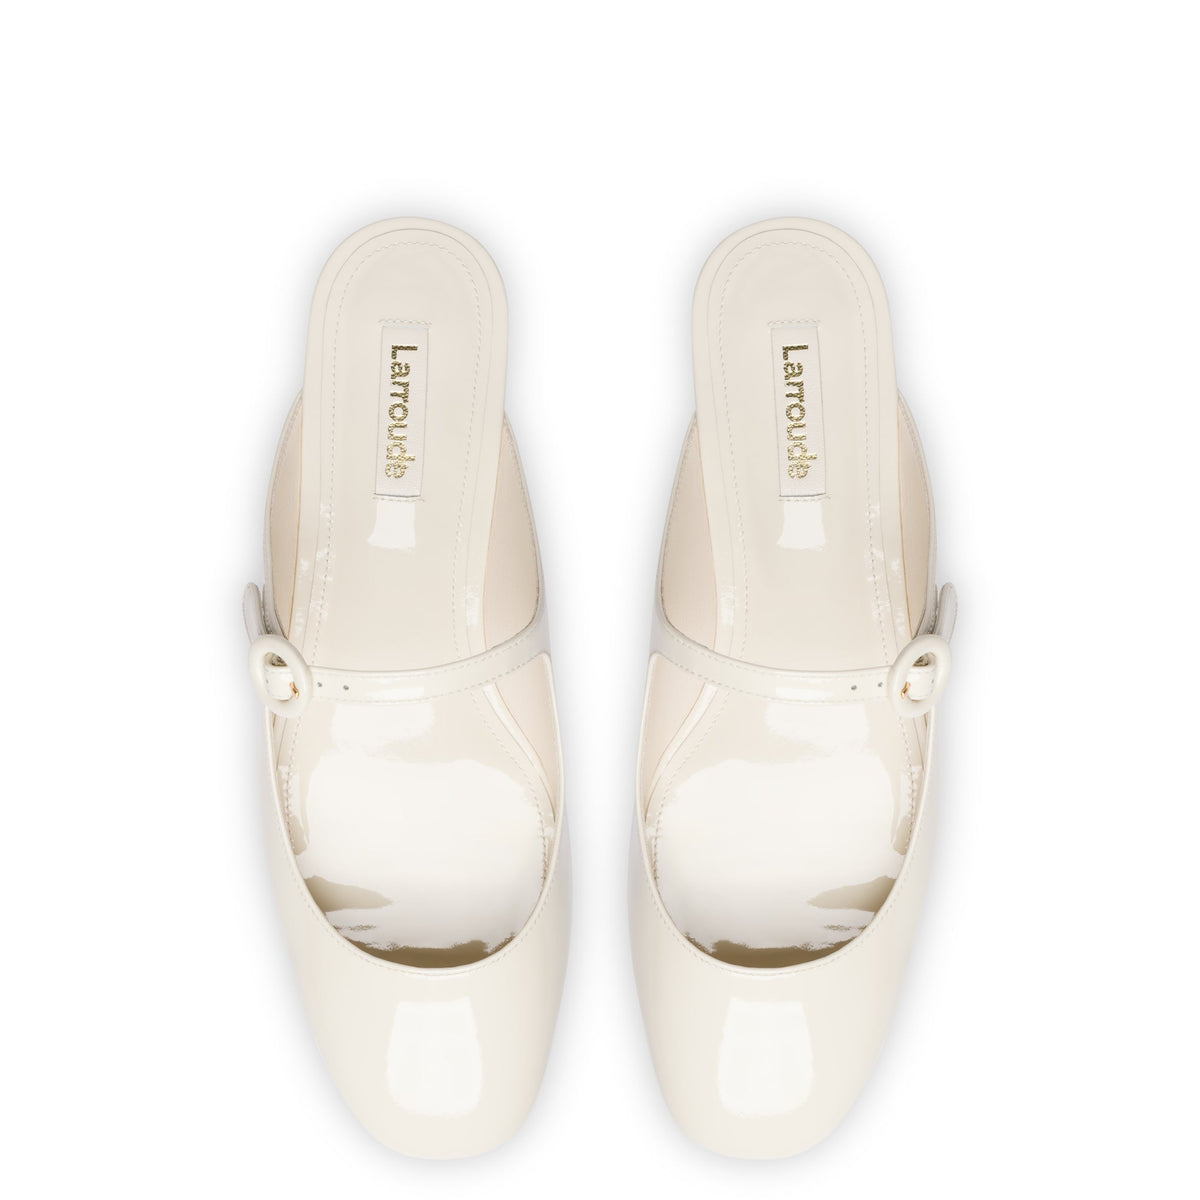 Blair Flat Mule in Ivory Patent Leather